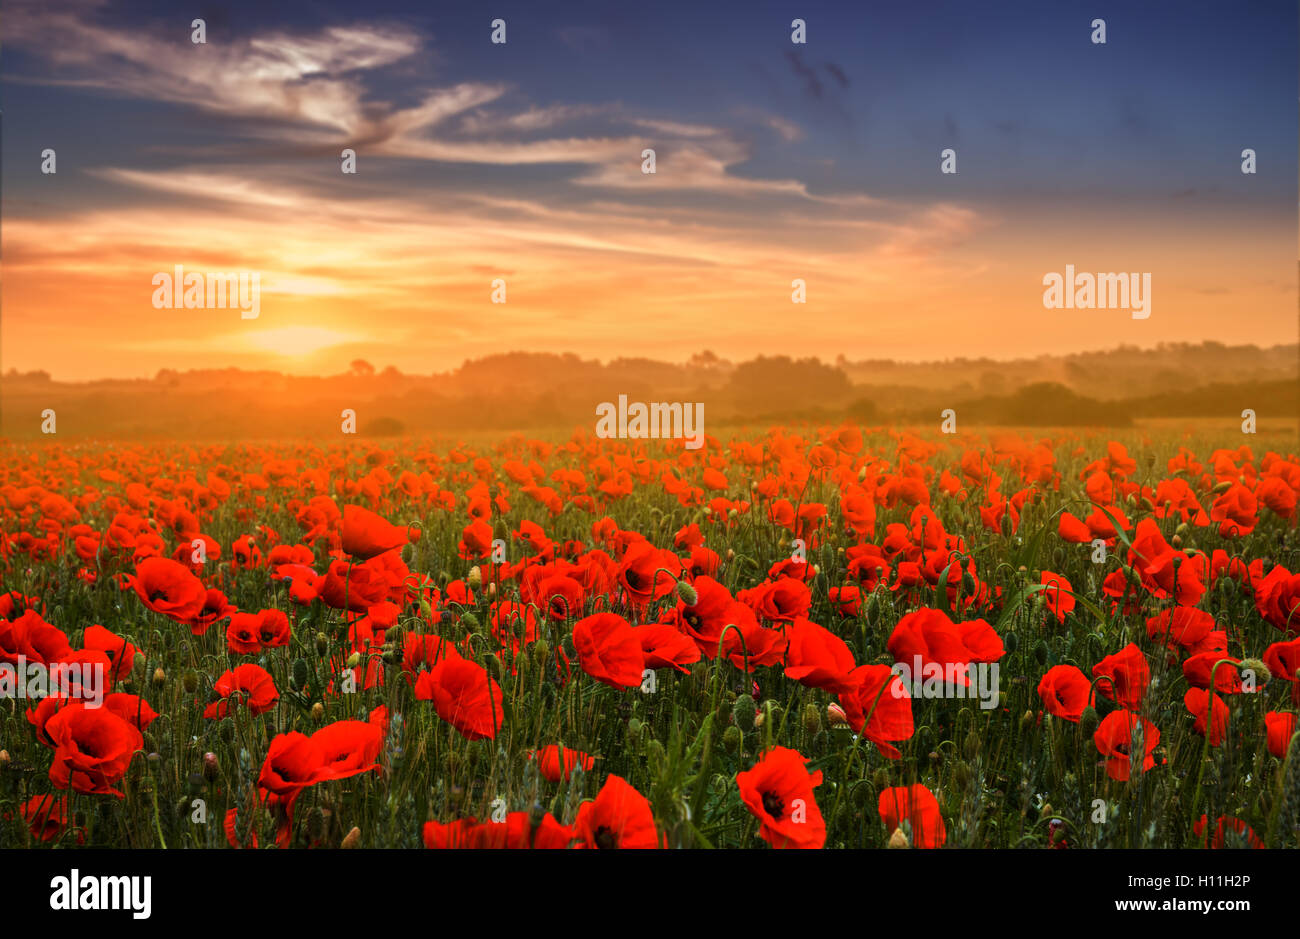 Red poppy field over sunset, Brittany France Stock Photo